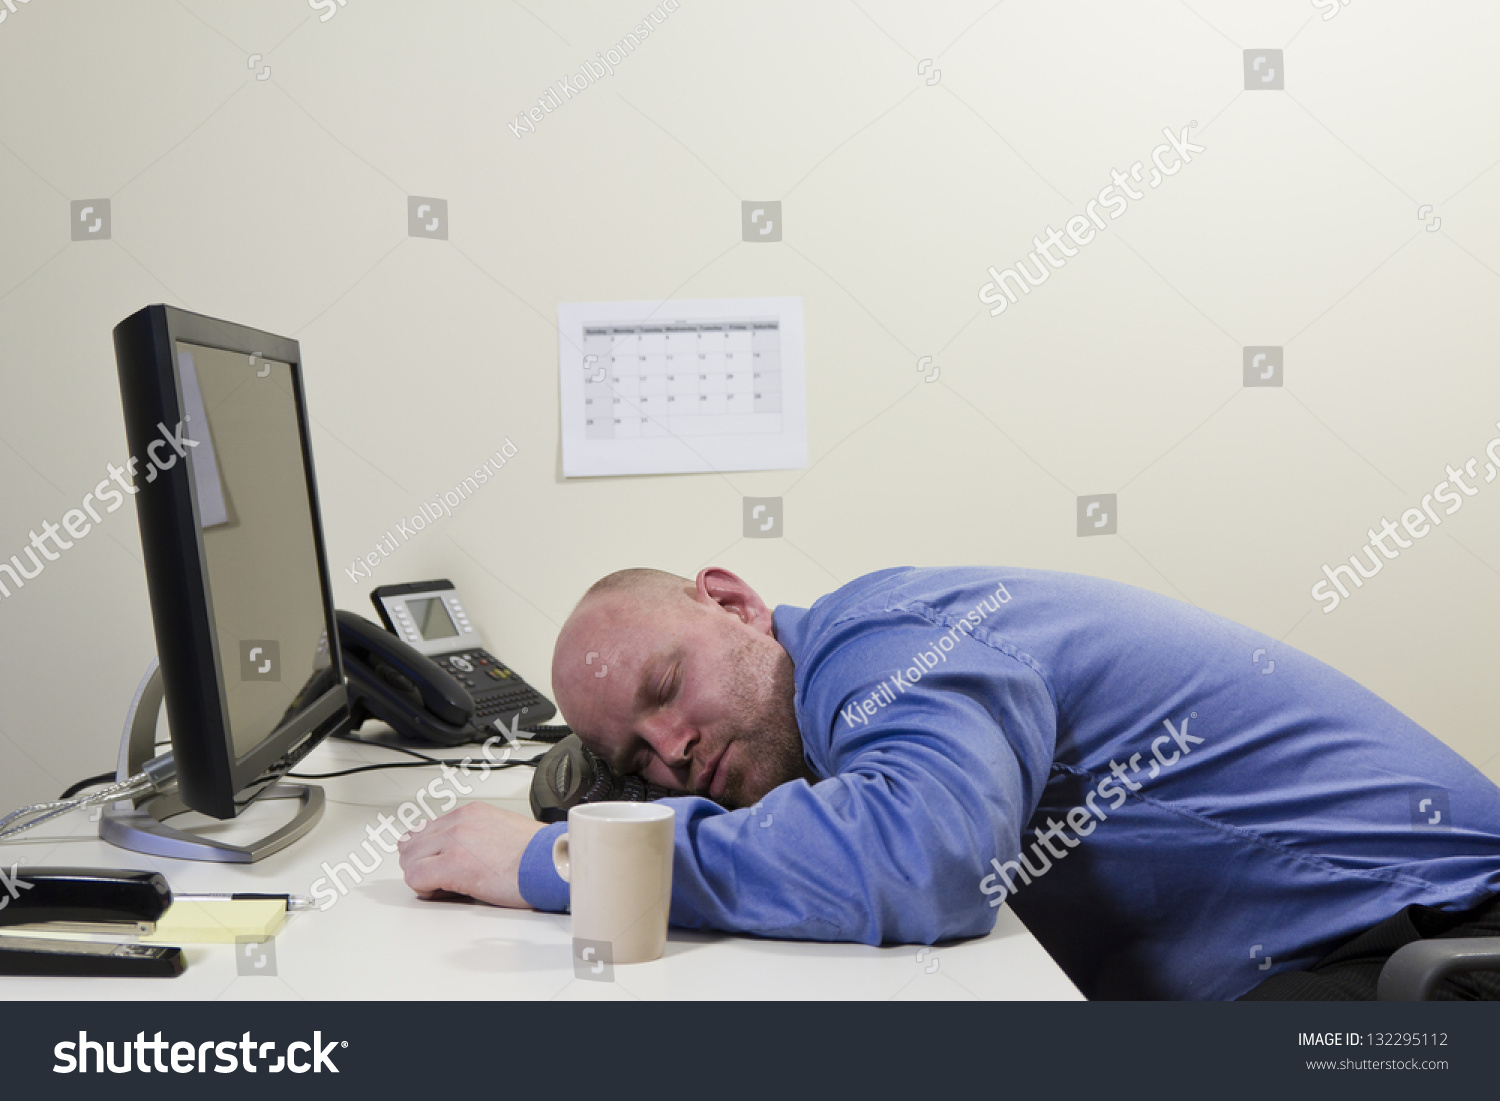 Exhausted Sleeping Office Worker His Head Stock Photo 132295112 ...